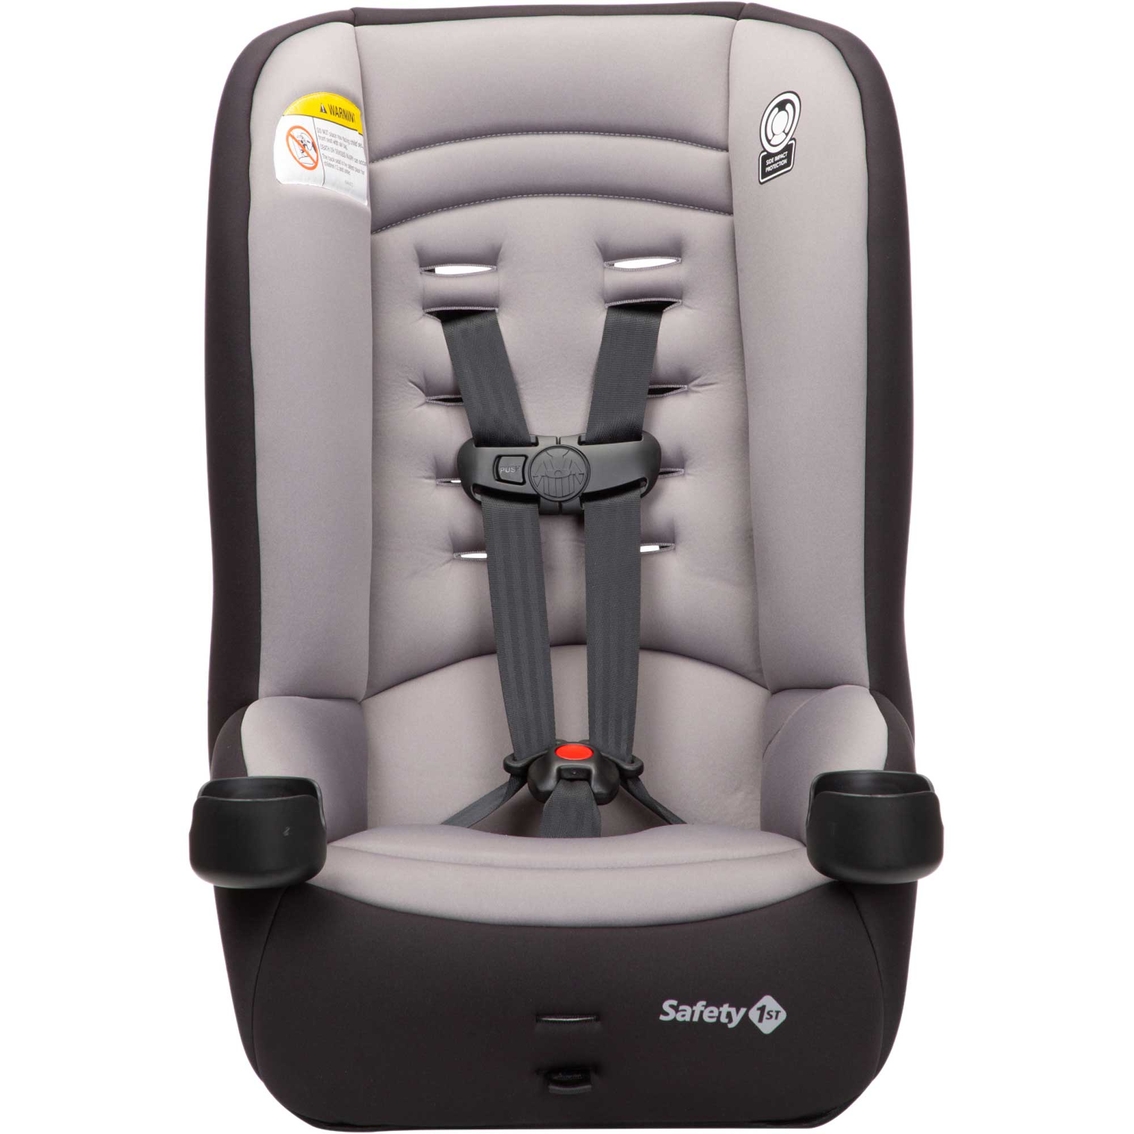 Safety 1st Jive 2-in-1 Convertible Car Seat - Image 7 of 10